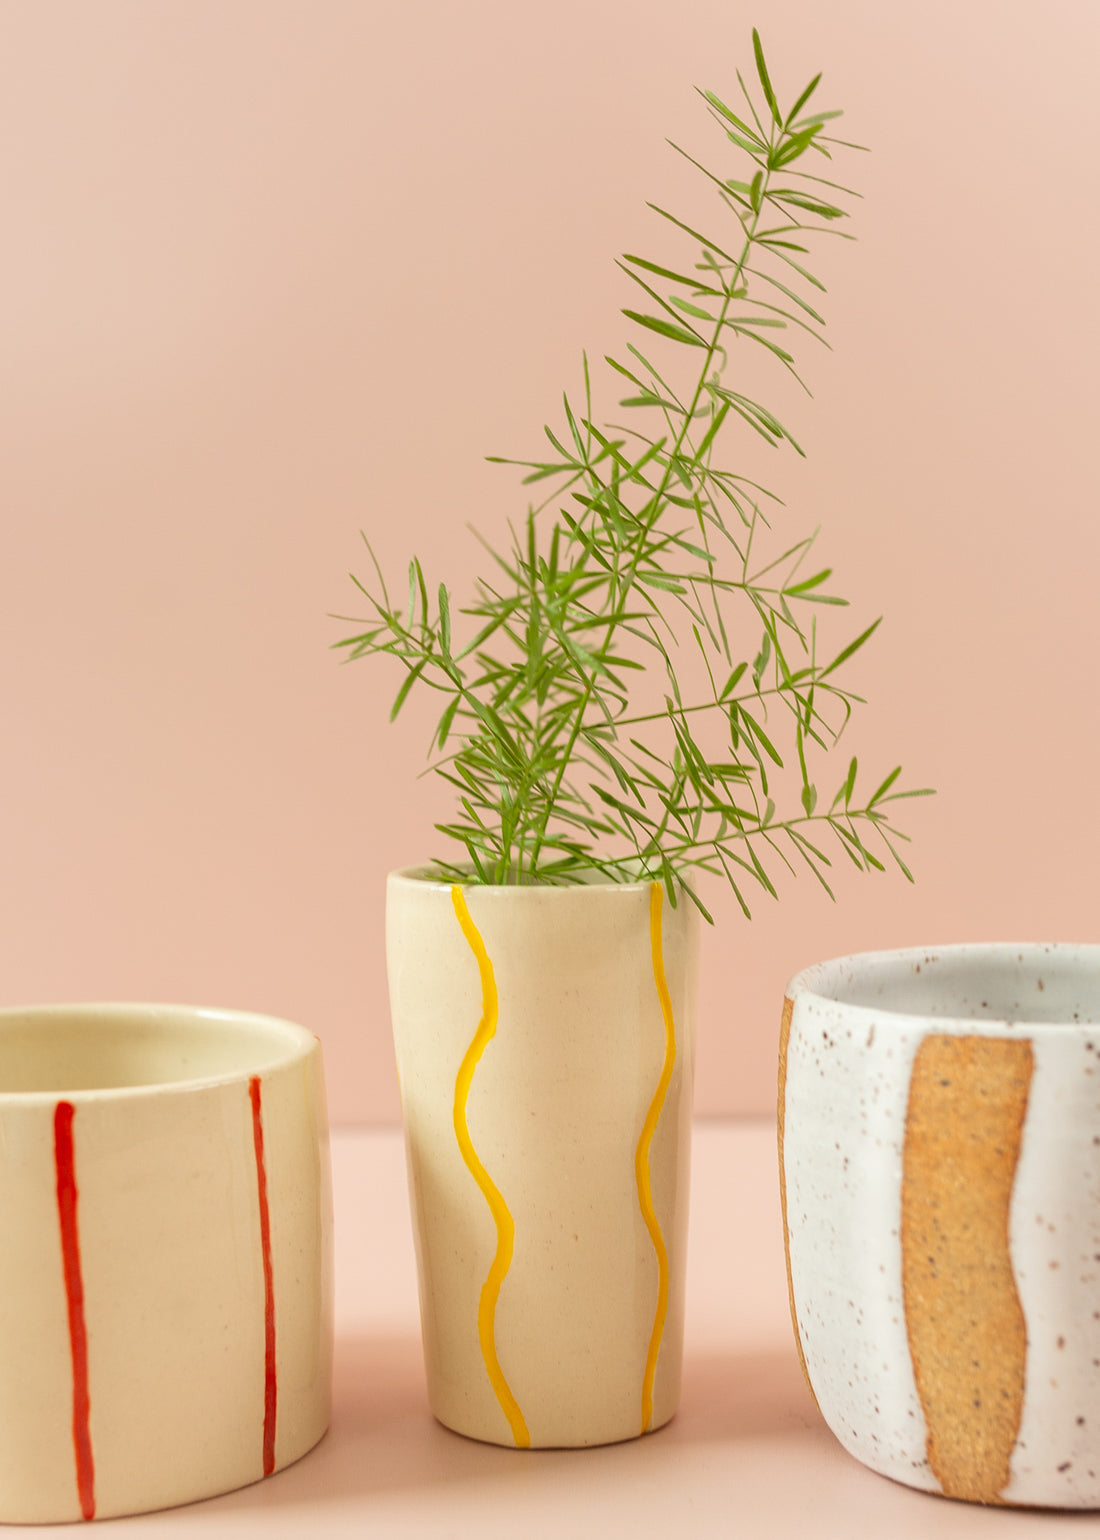 Smal cream vase with squiggly, bright yellow paint lines running vertically around the vase. There is a green branch in the vase, and two mugs on either side of vase.